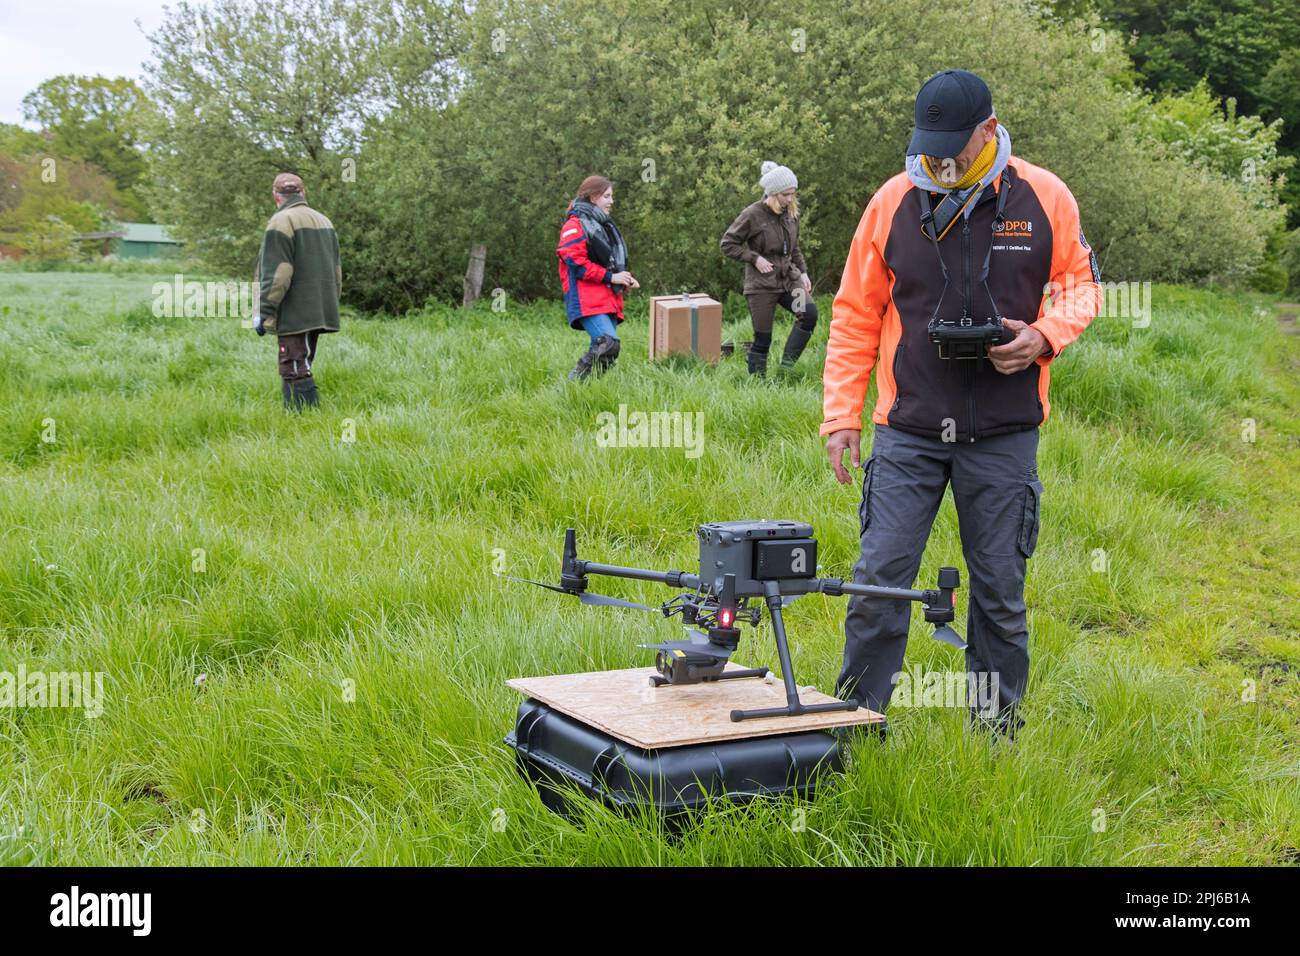 Rescue team operating professional drone to locate roe deer fawns hidden in grass with thermal imaging camera before mowing grassland in spring Stock Photo